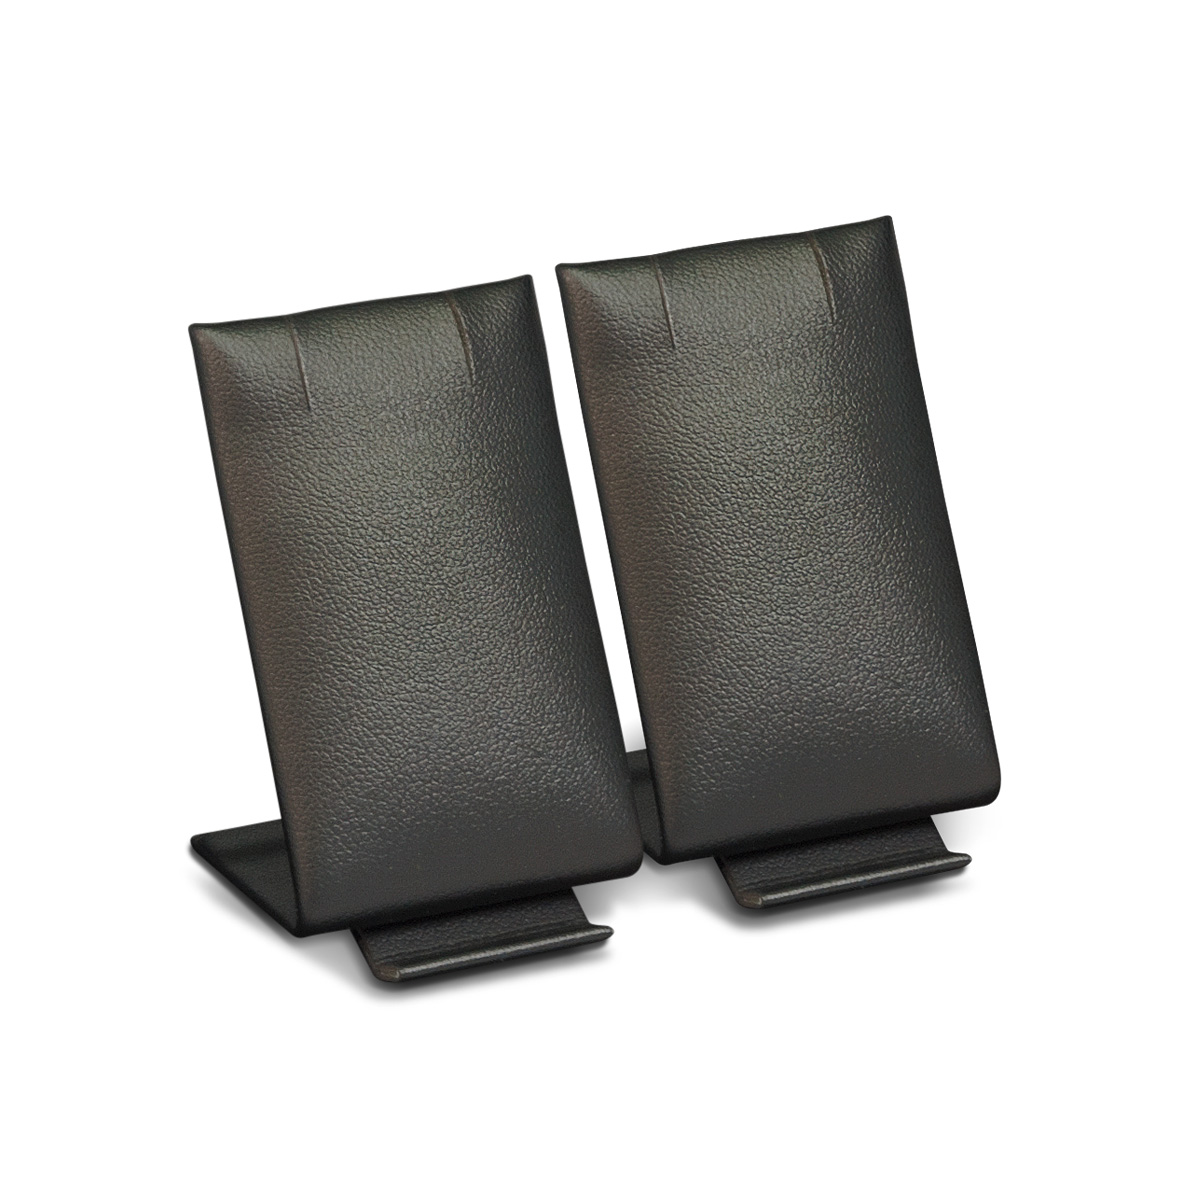 Double presentation display for earrings, high, smooth leather imitation, black, LxWxD ca. 3,5 x 7,0 x 6,0 cm